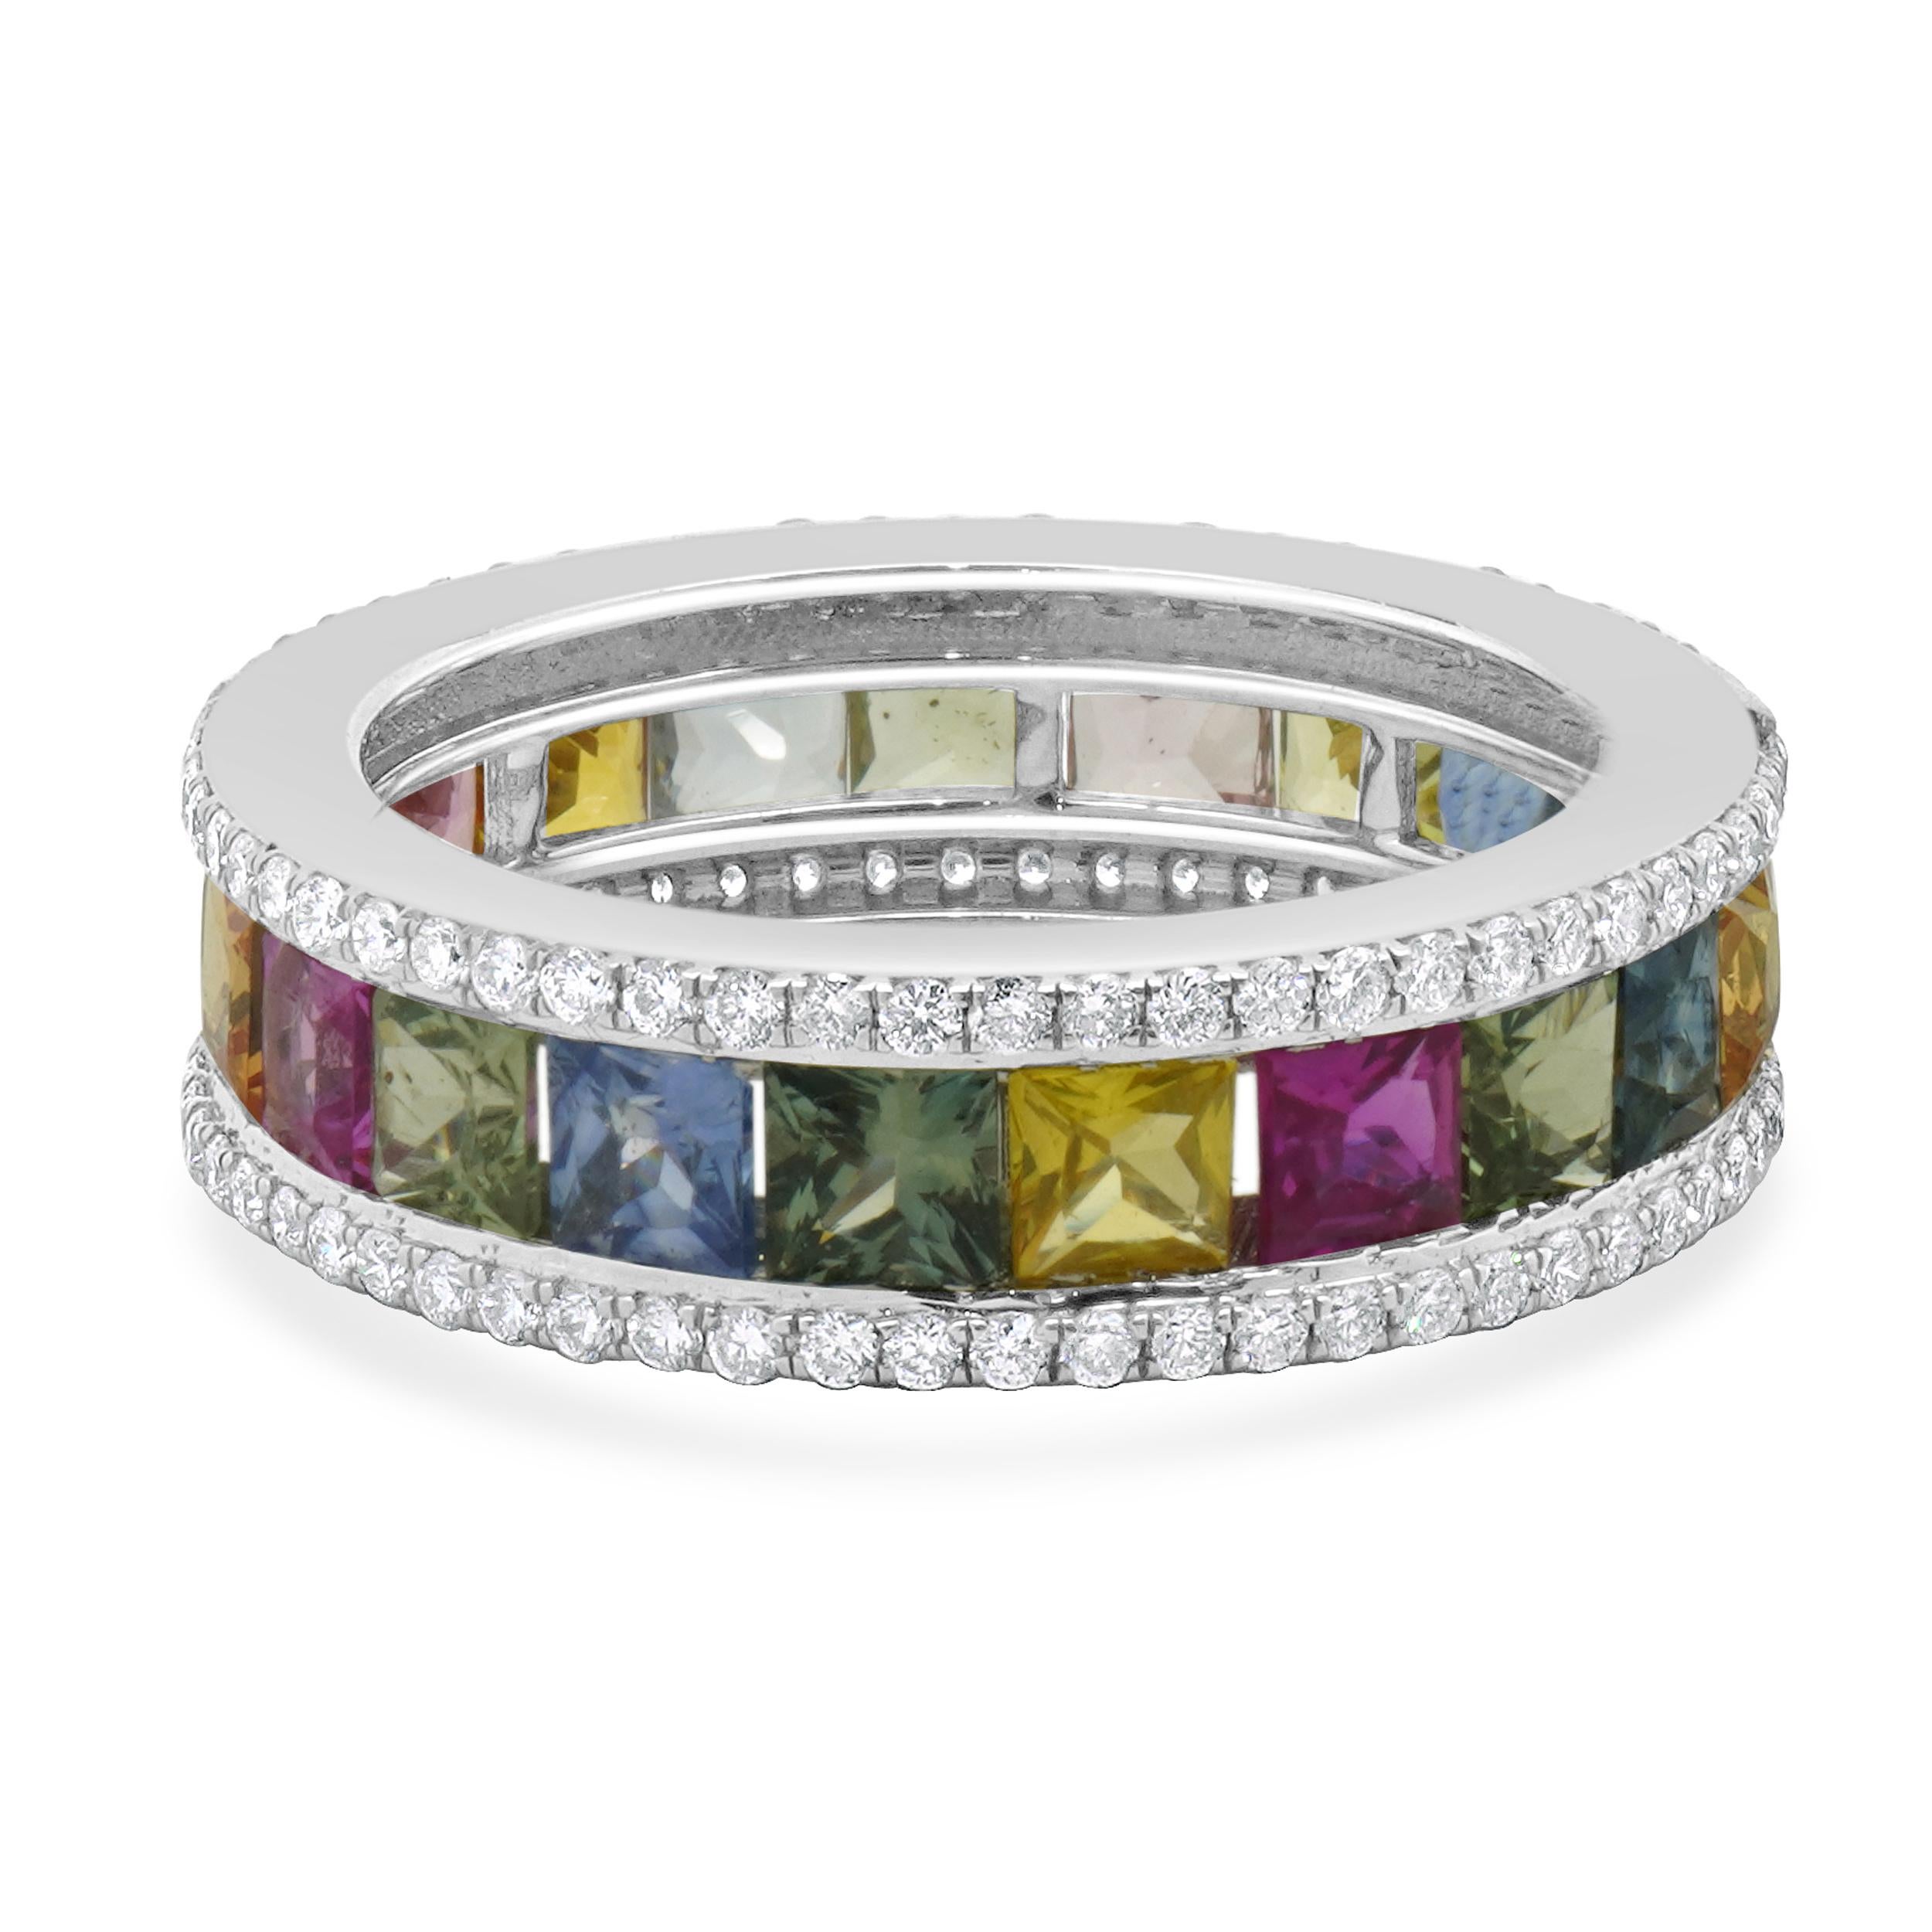 Designer: custom
Material: 14K white gold
Diamond:  round brilliant cut = 0.63cttw
Color: G	
Clarity: VS-SI1
Rainbow Sapphire: Princess cut = 3.69ct
Ring size: 6 (please allow two additional shipping days for sizing requests)
Weight: 4.58 grams
